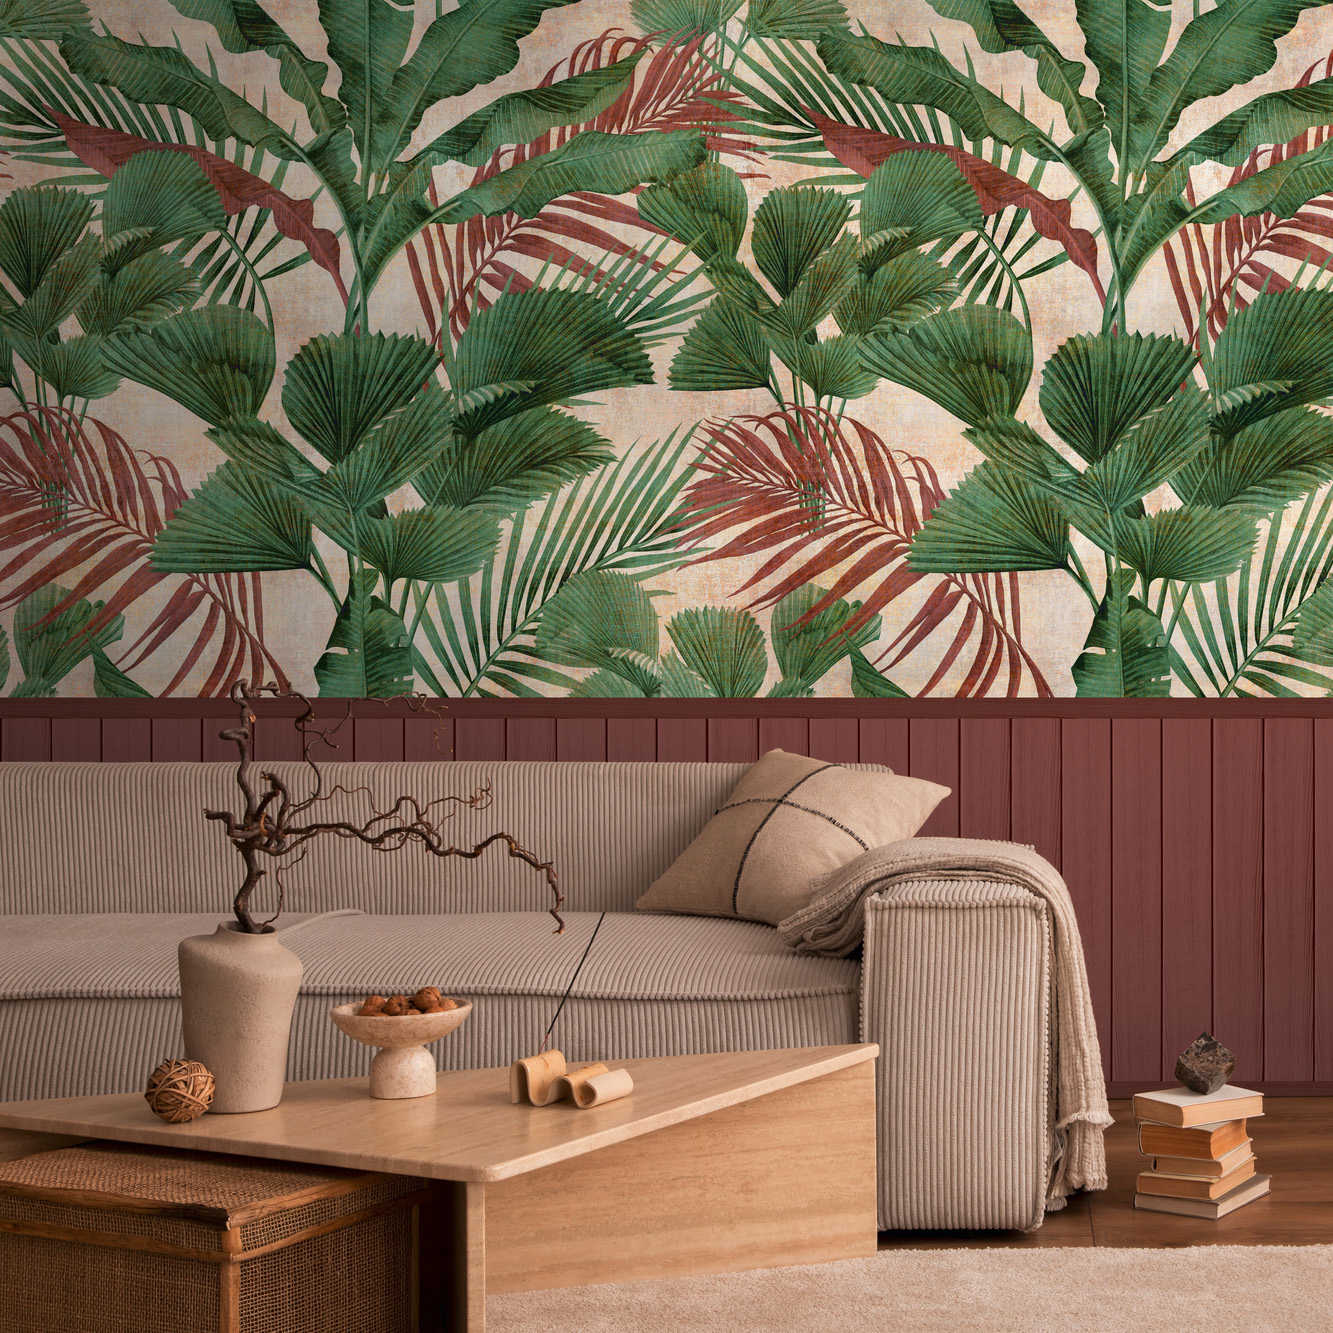 Non-woven motif wallpaper with wood-effect plinth border and jungle pattern - red, green, beige
